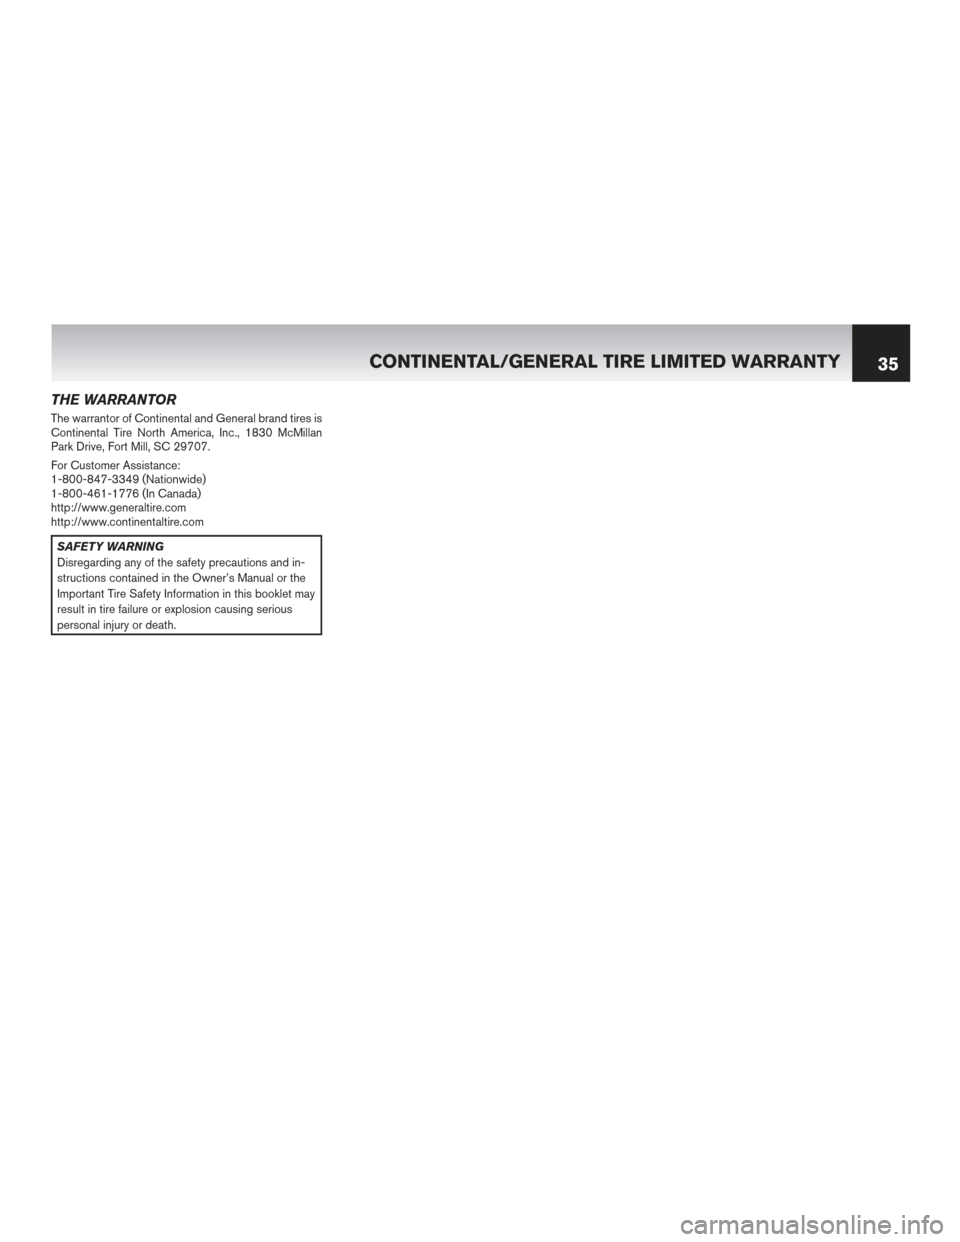 NISSAN VERSA 2017 2.G Warranty Booklet THE WARRANTOR
The warrantor of Continental and General brand tires is
Continental Tire North America, Inc., 1830 McMillan
Park Drive, Fort Mill, SC 29707.
For Customer Assistance:
1-800-847-3349 (Nati